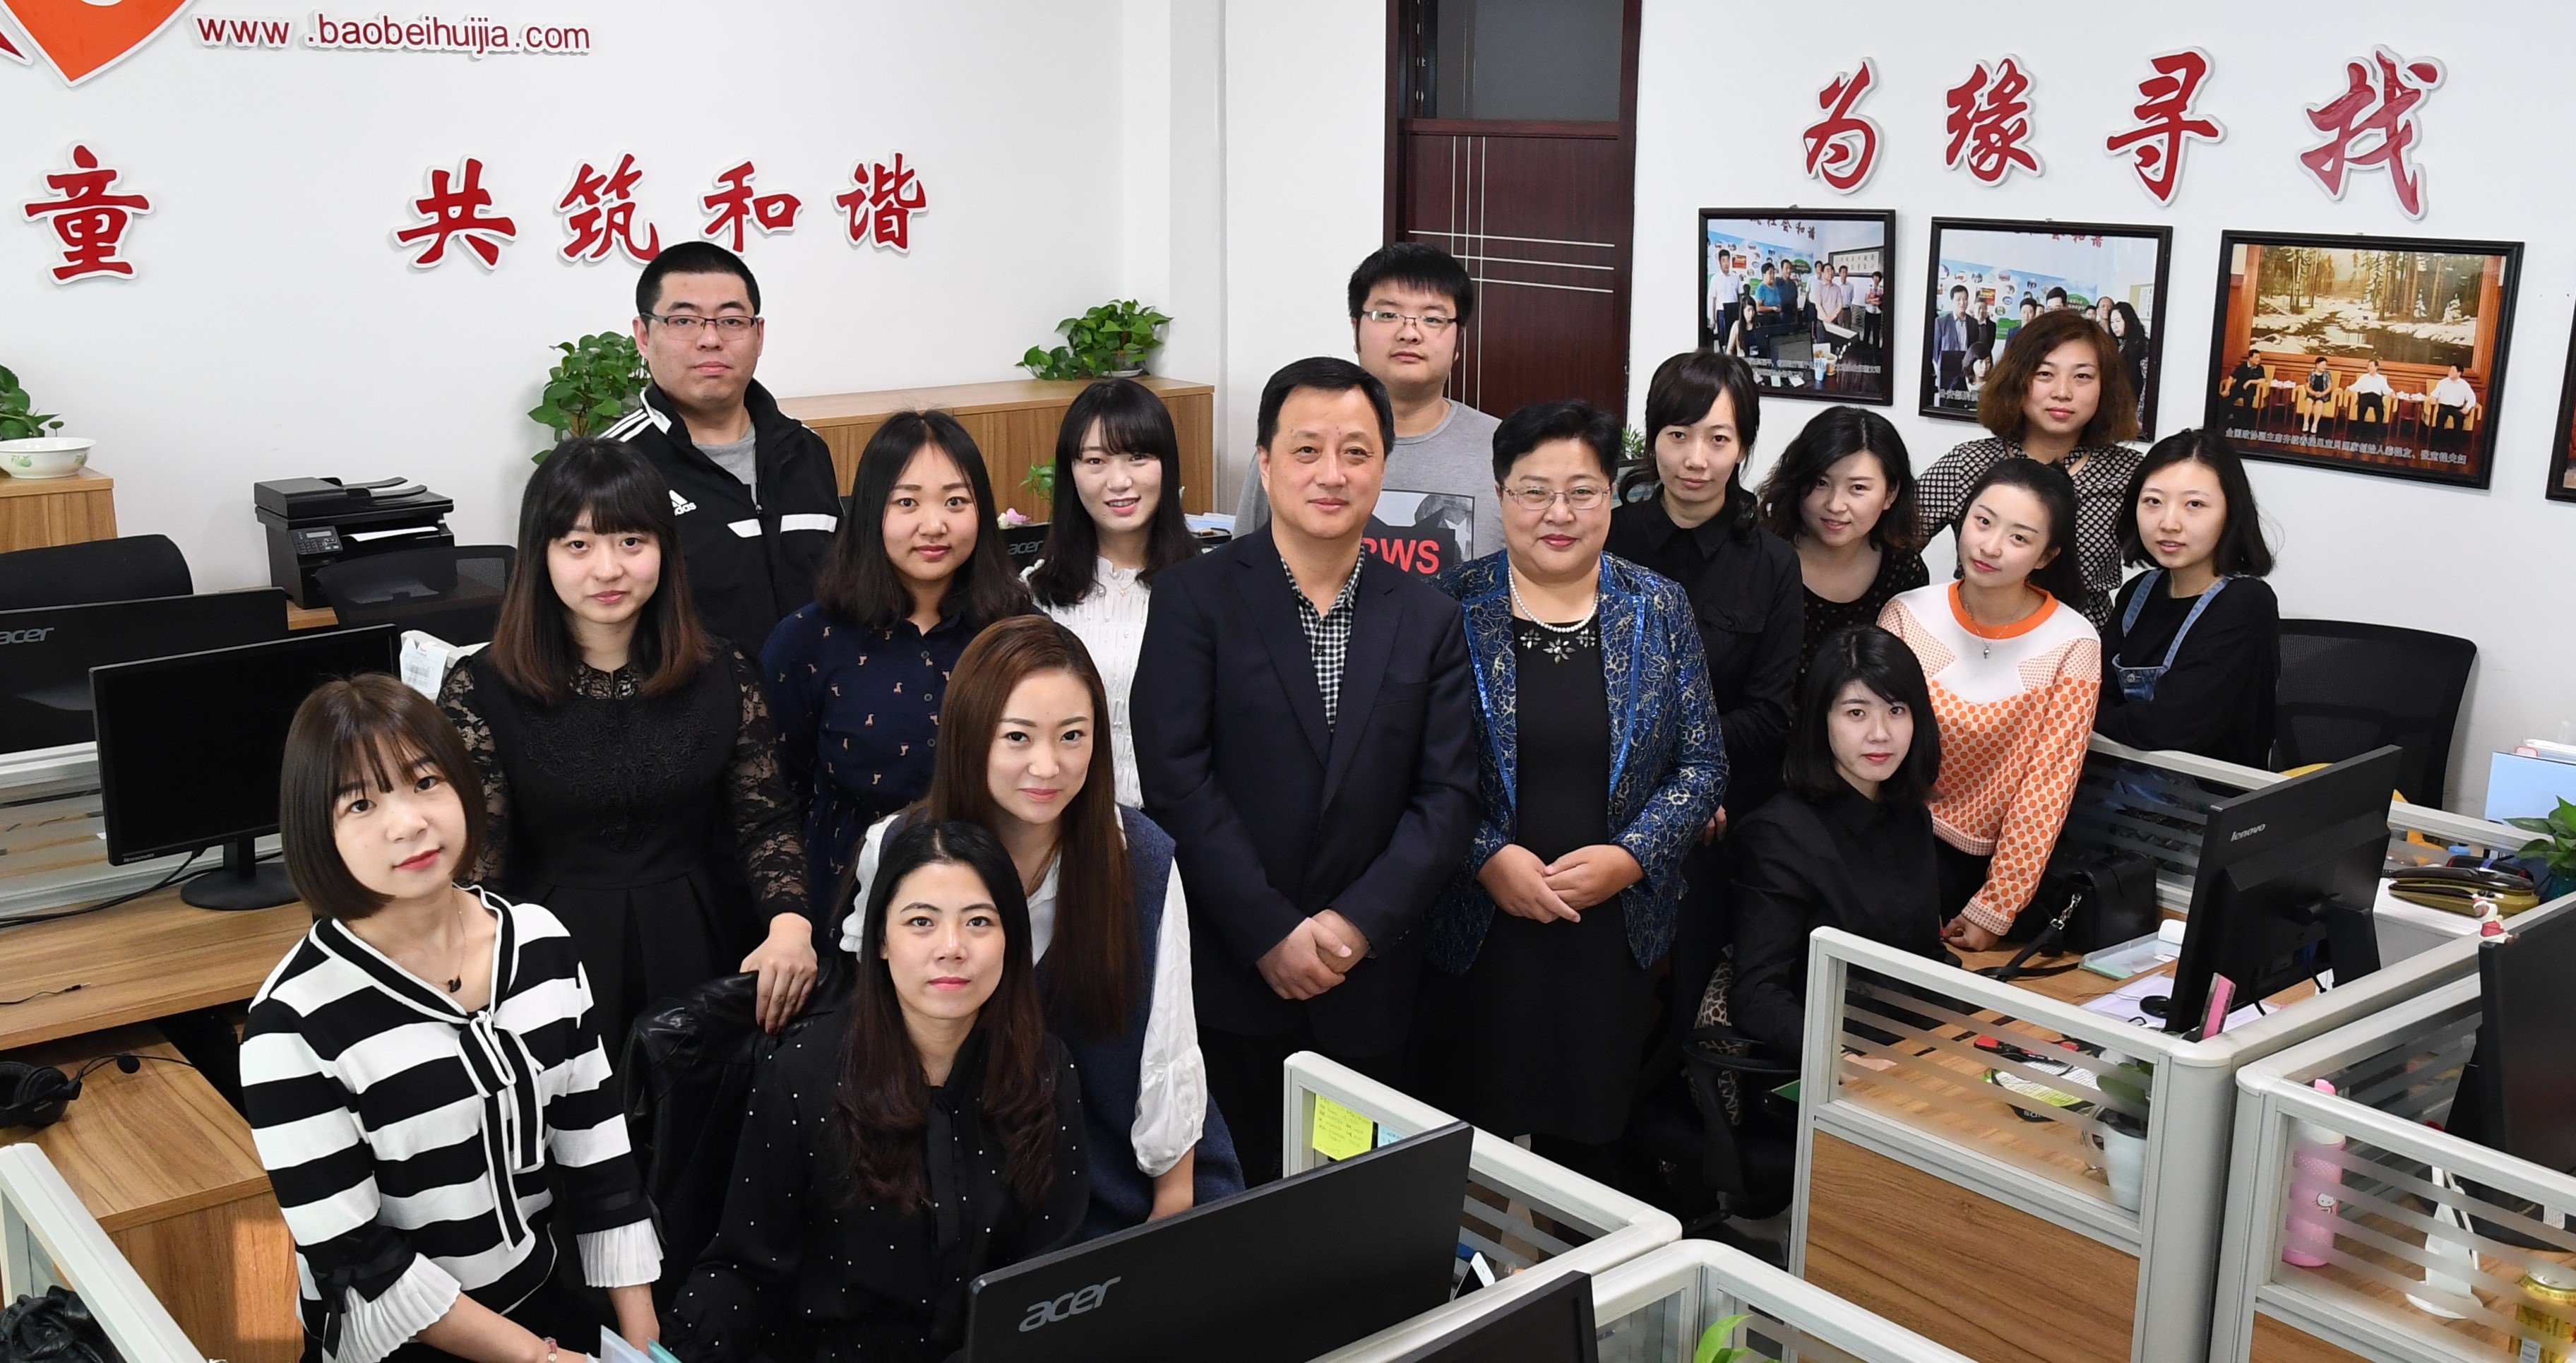 Group photo of employees at nonprofit in China. 